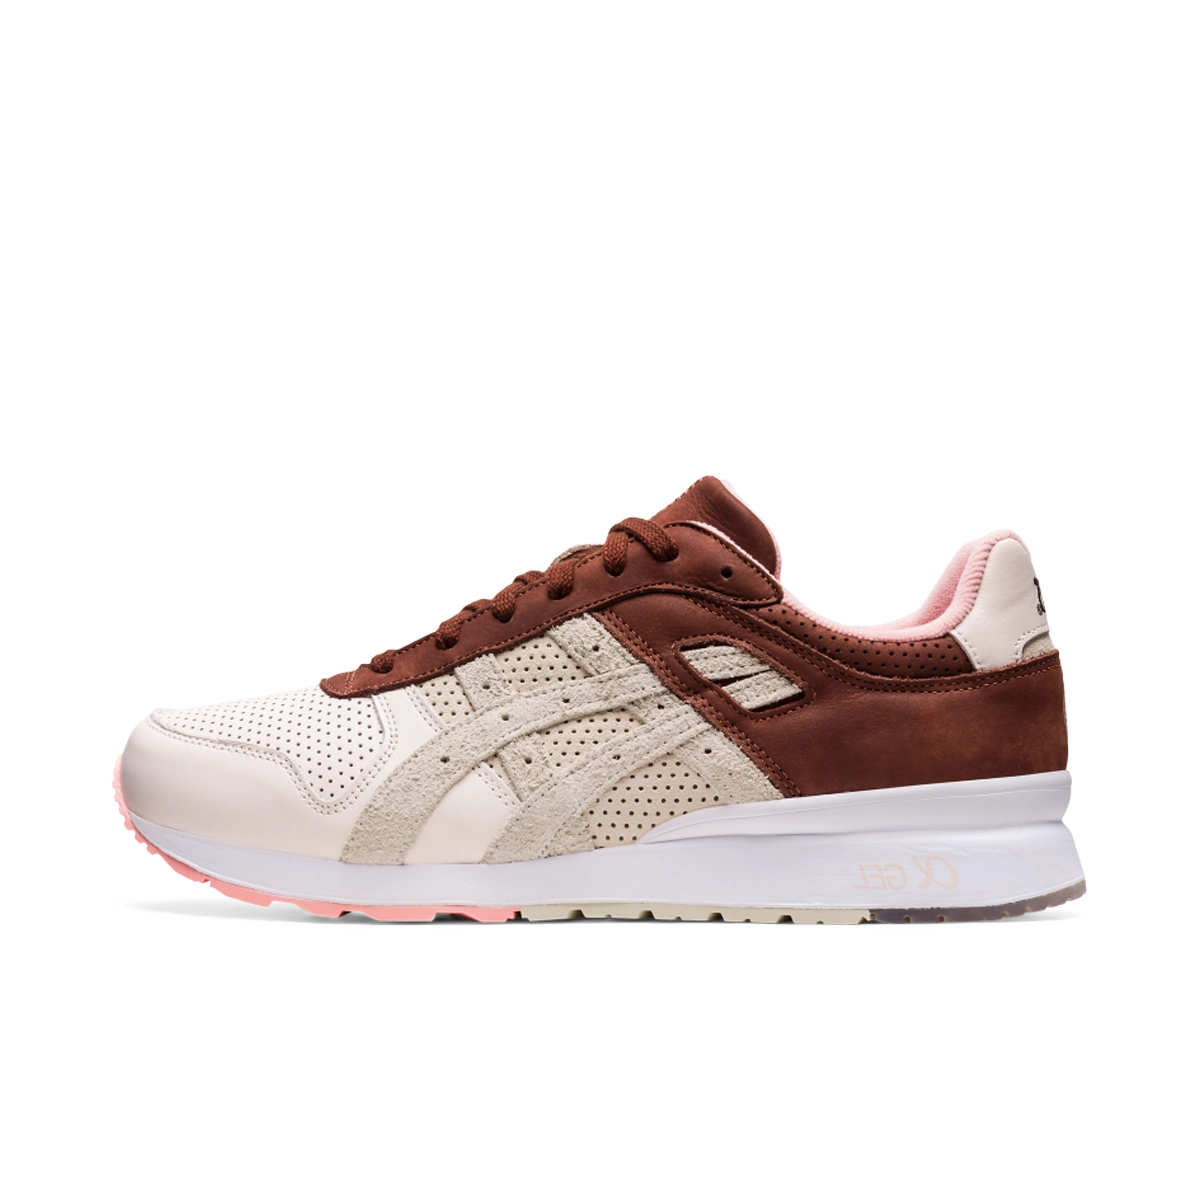 Afew x Asics GT-II 'Chocolate Brown' - Uplifting Pack Hottest Sneaker